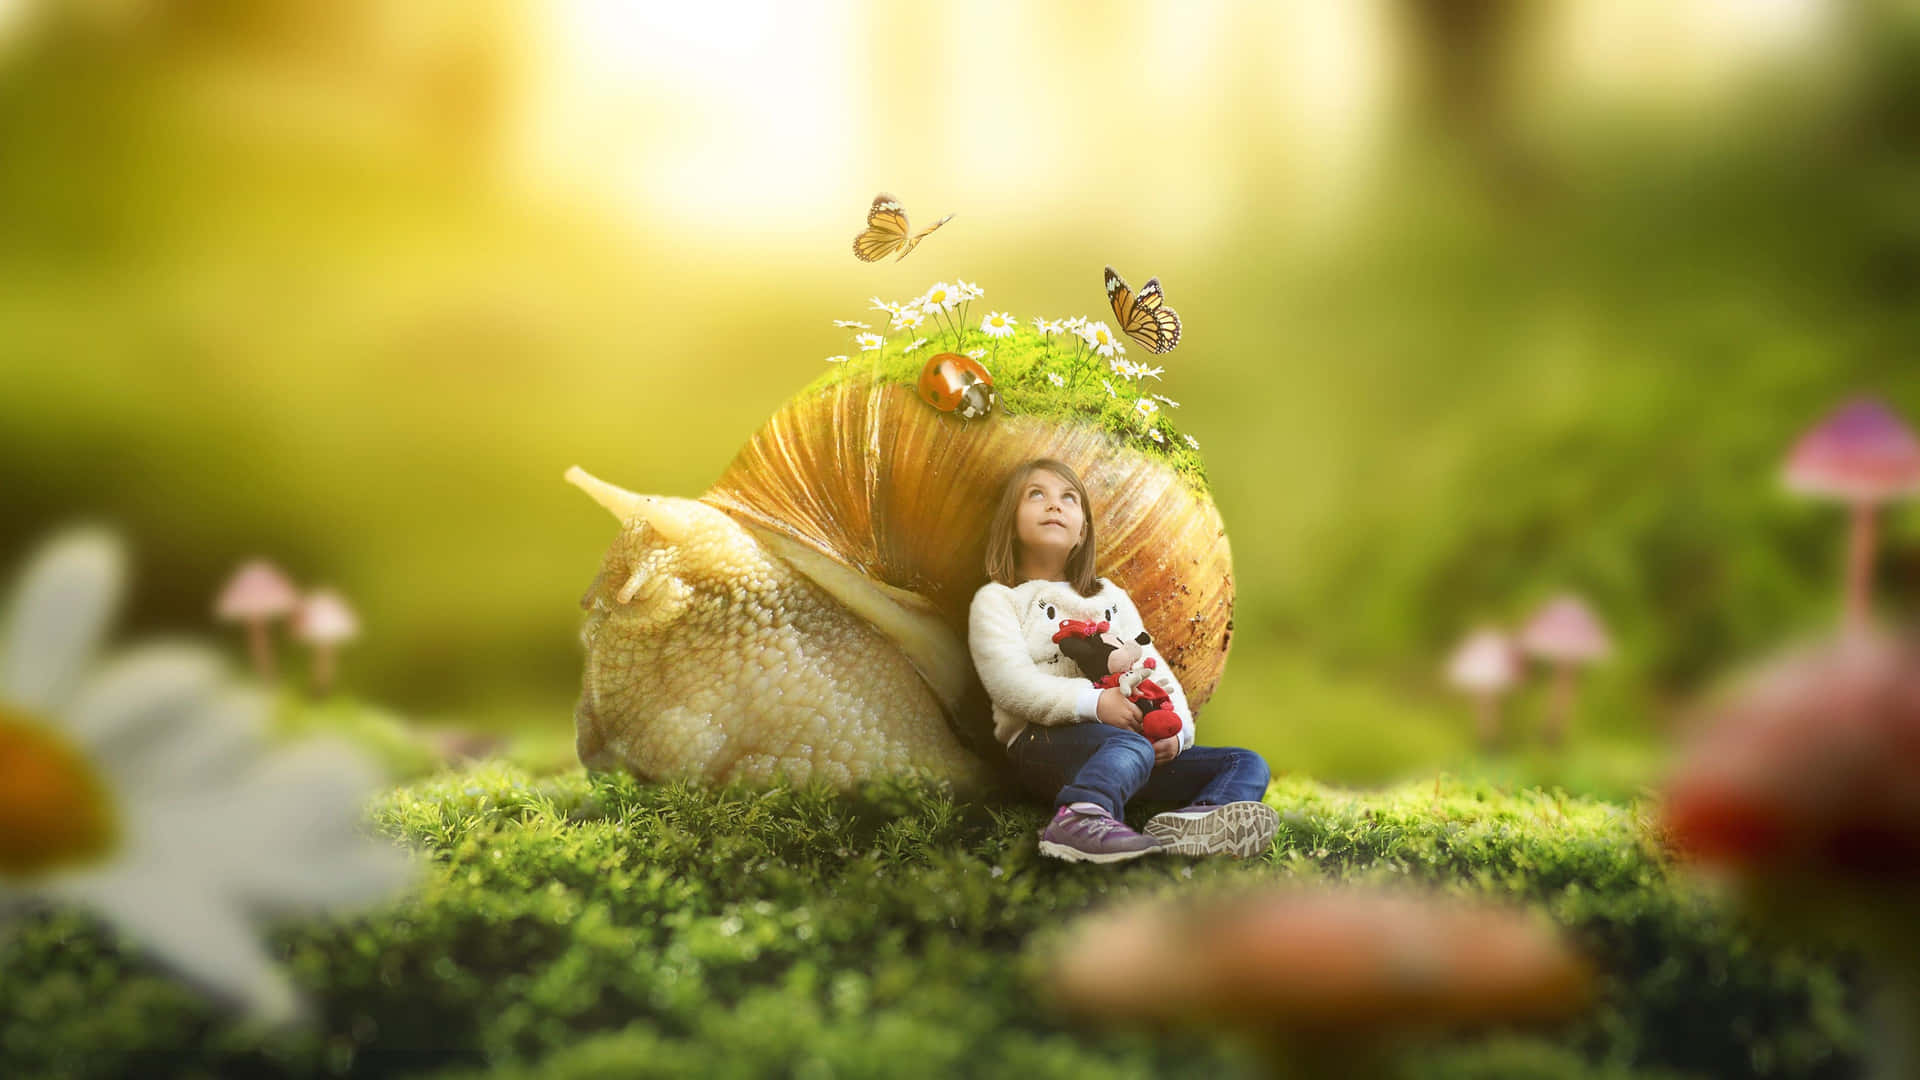 A Girl Sitting On A Snail In The Grass